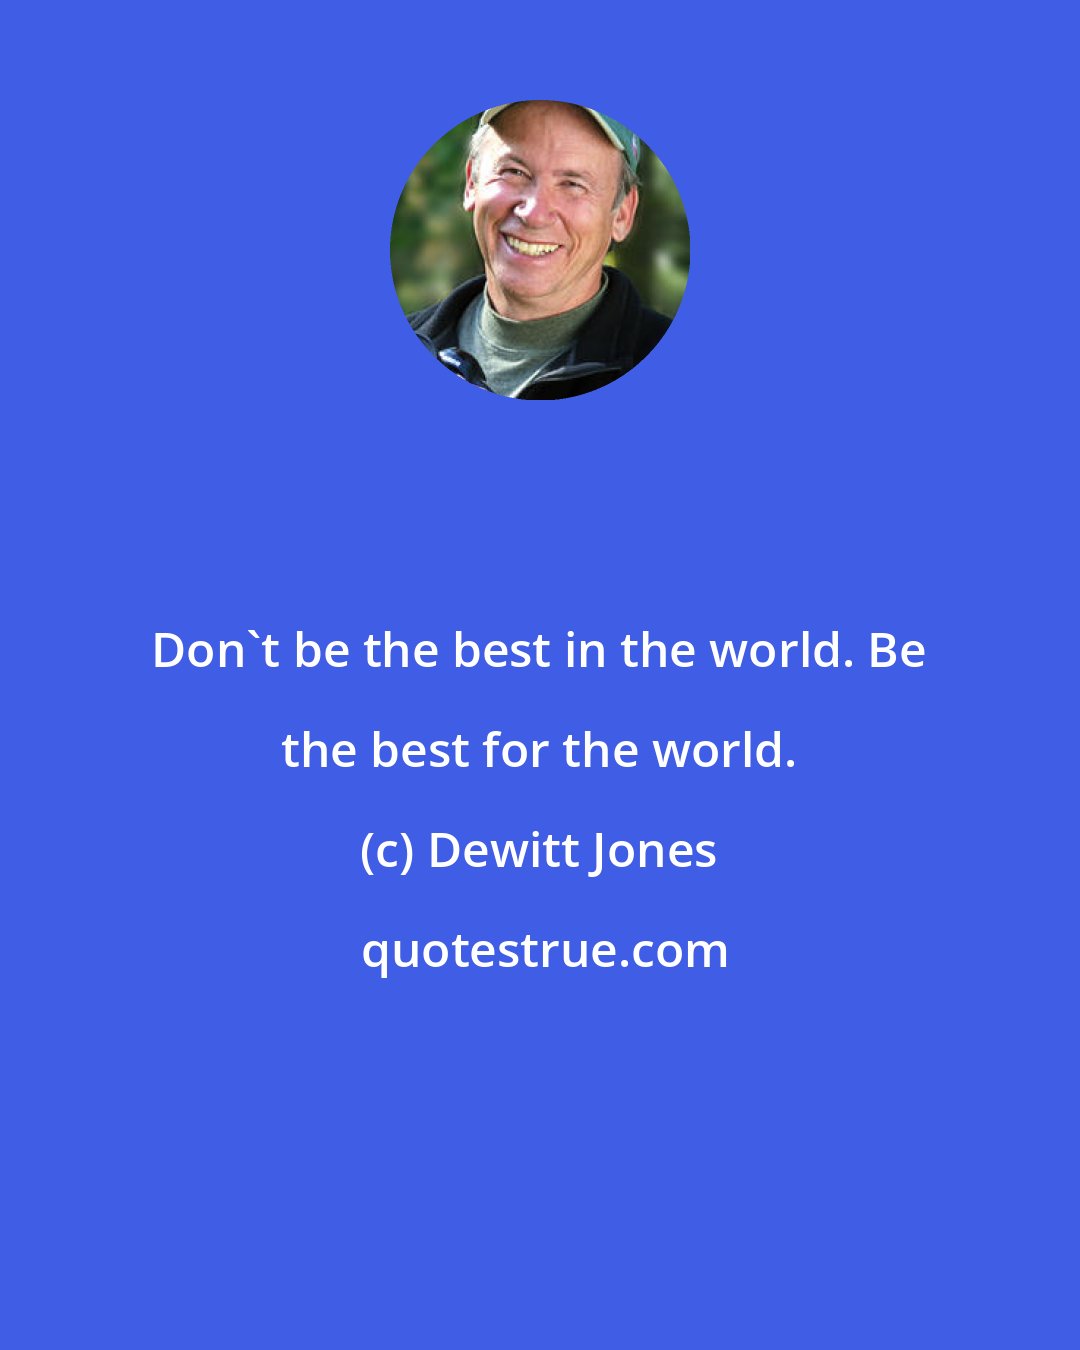 Dewitt Jones: Don't be the best in the world. Be the best for the world.